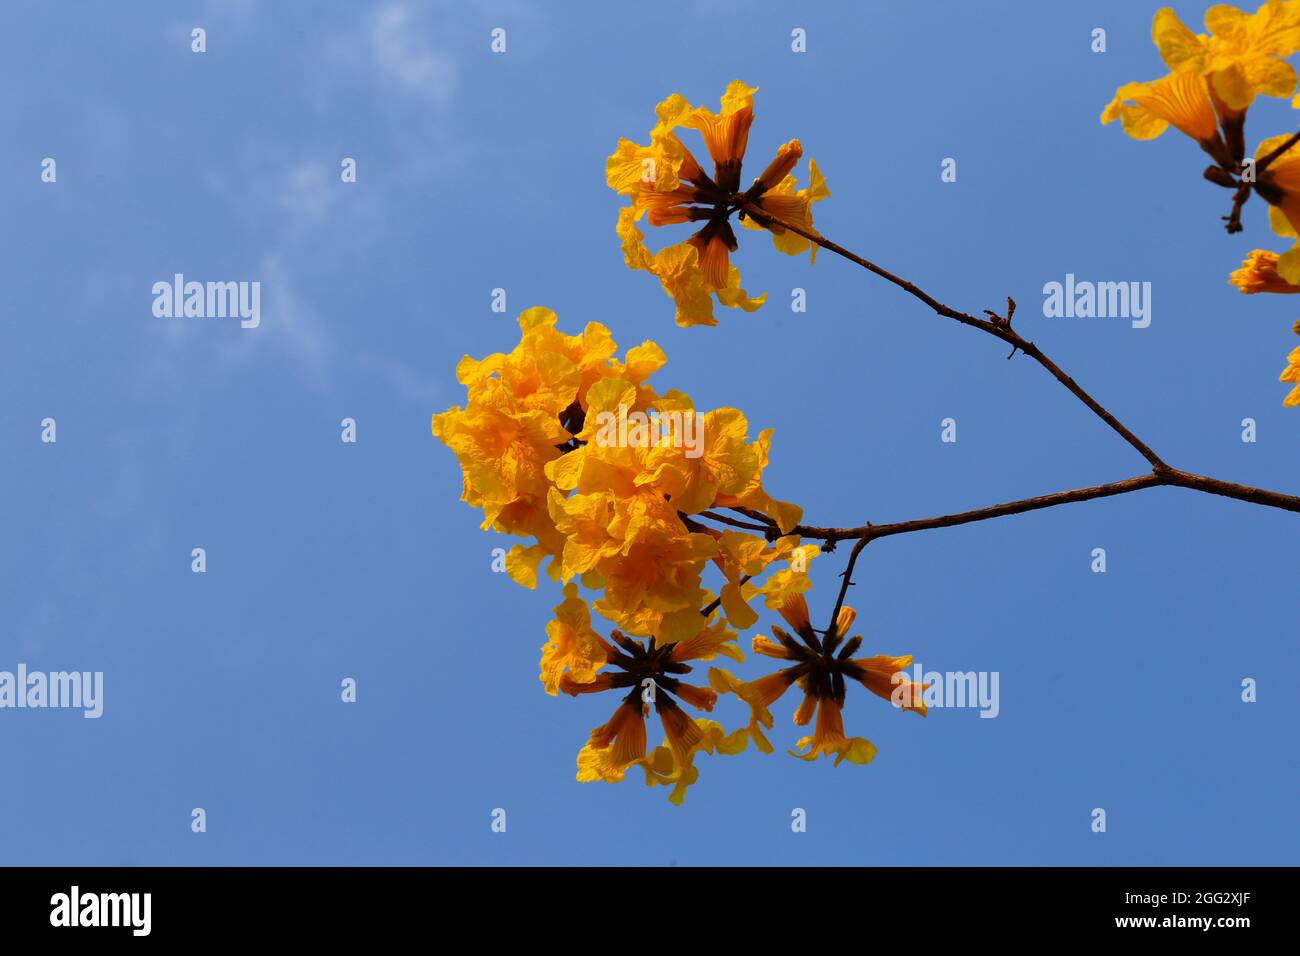 Bloom detail in yellow ipe tree with bright blue sky Stock Photo